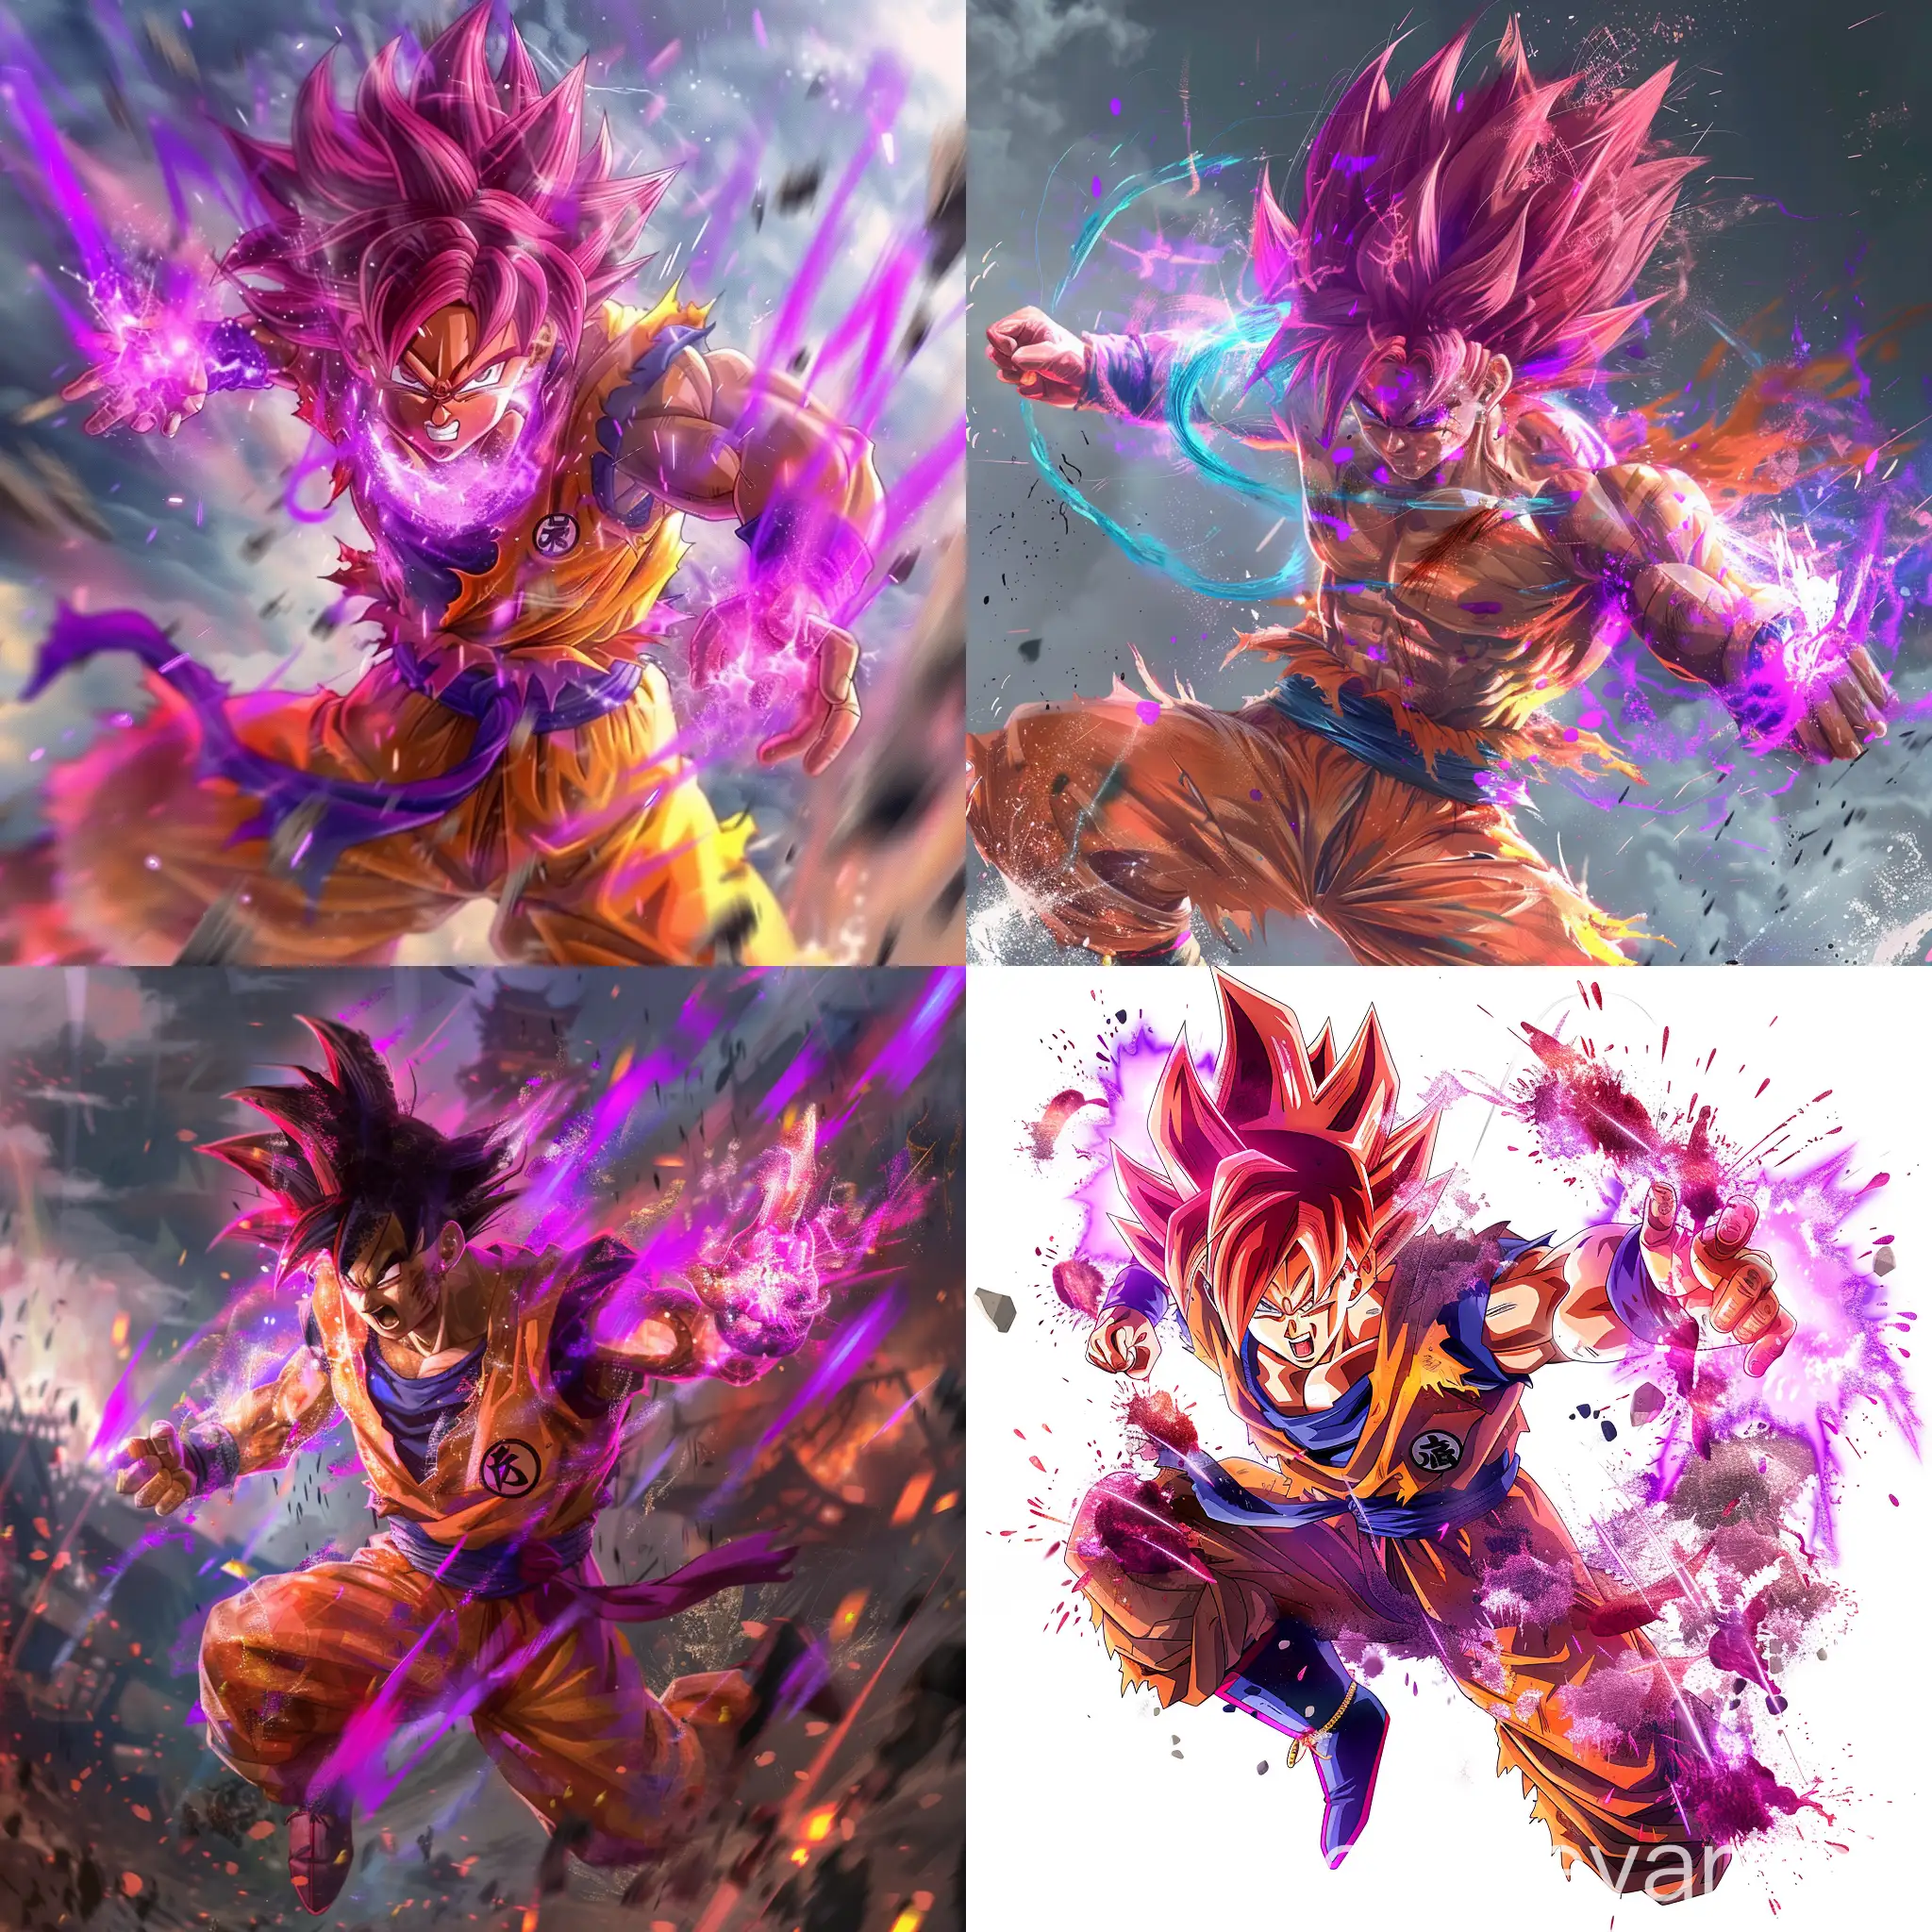 Dragon Ball anime character Goku as a Indian men, with same hair, with Super sayian god form, purple and other colorful aura, dynamic action pose, hyper-realistic 